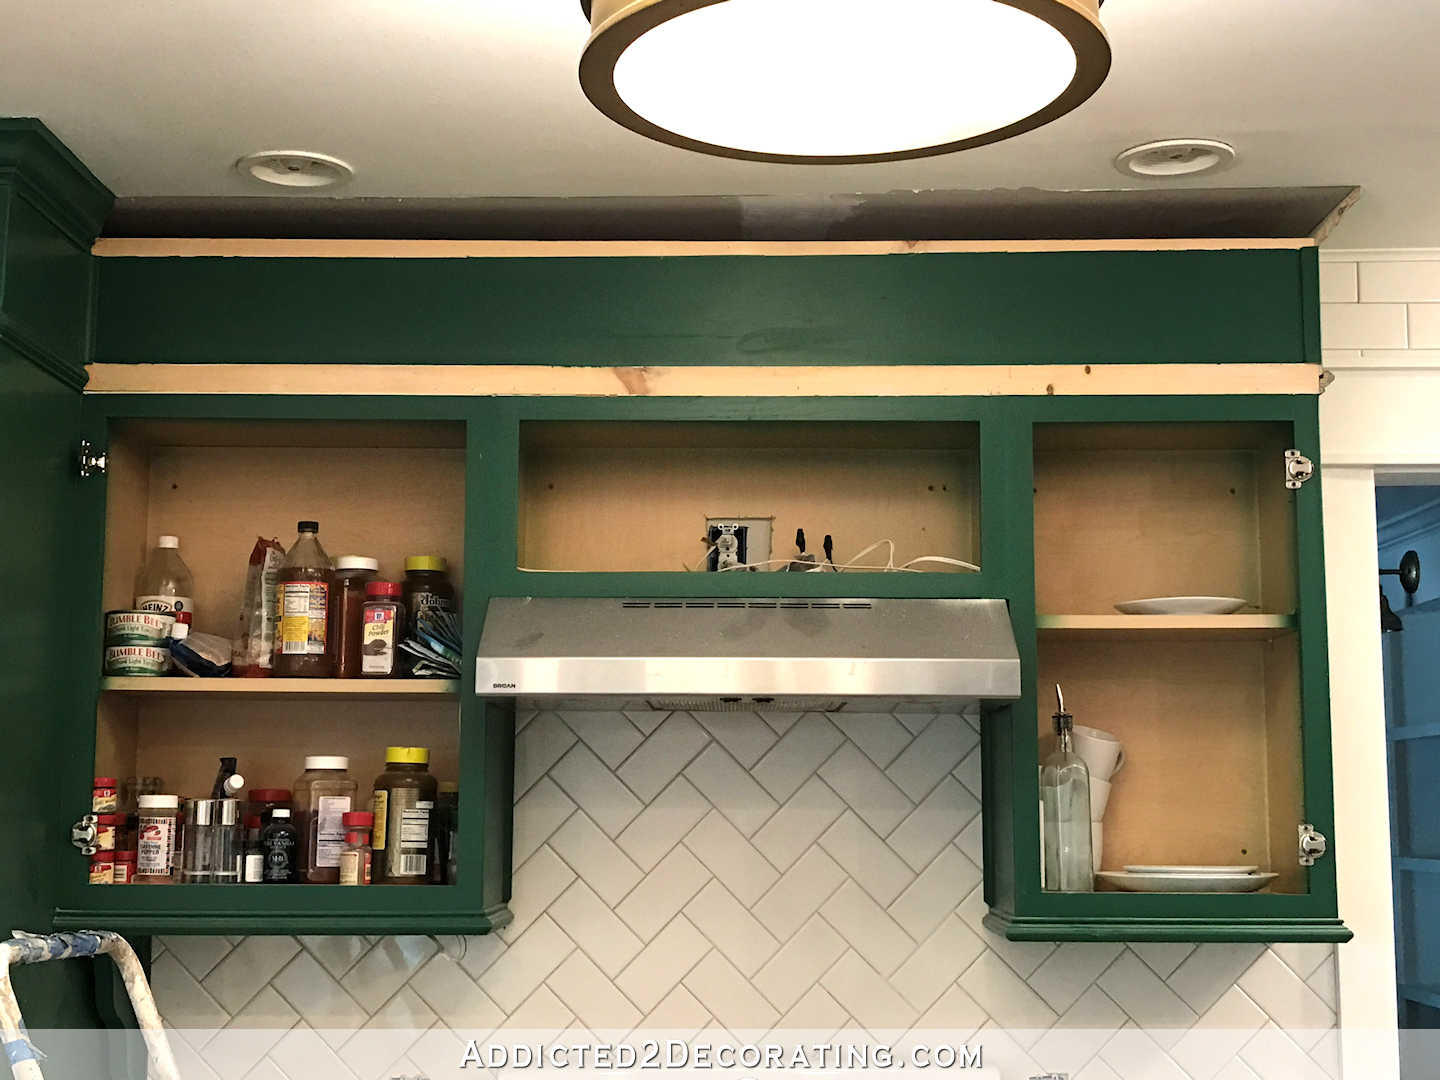 how to build a custom wood range hood cover - 2 - remove any existing trim and crown moulding